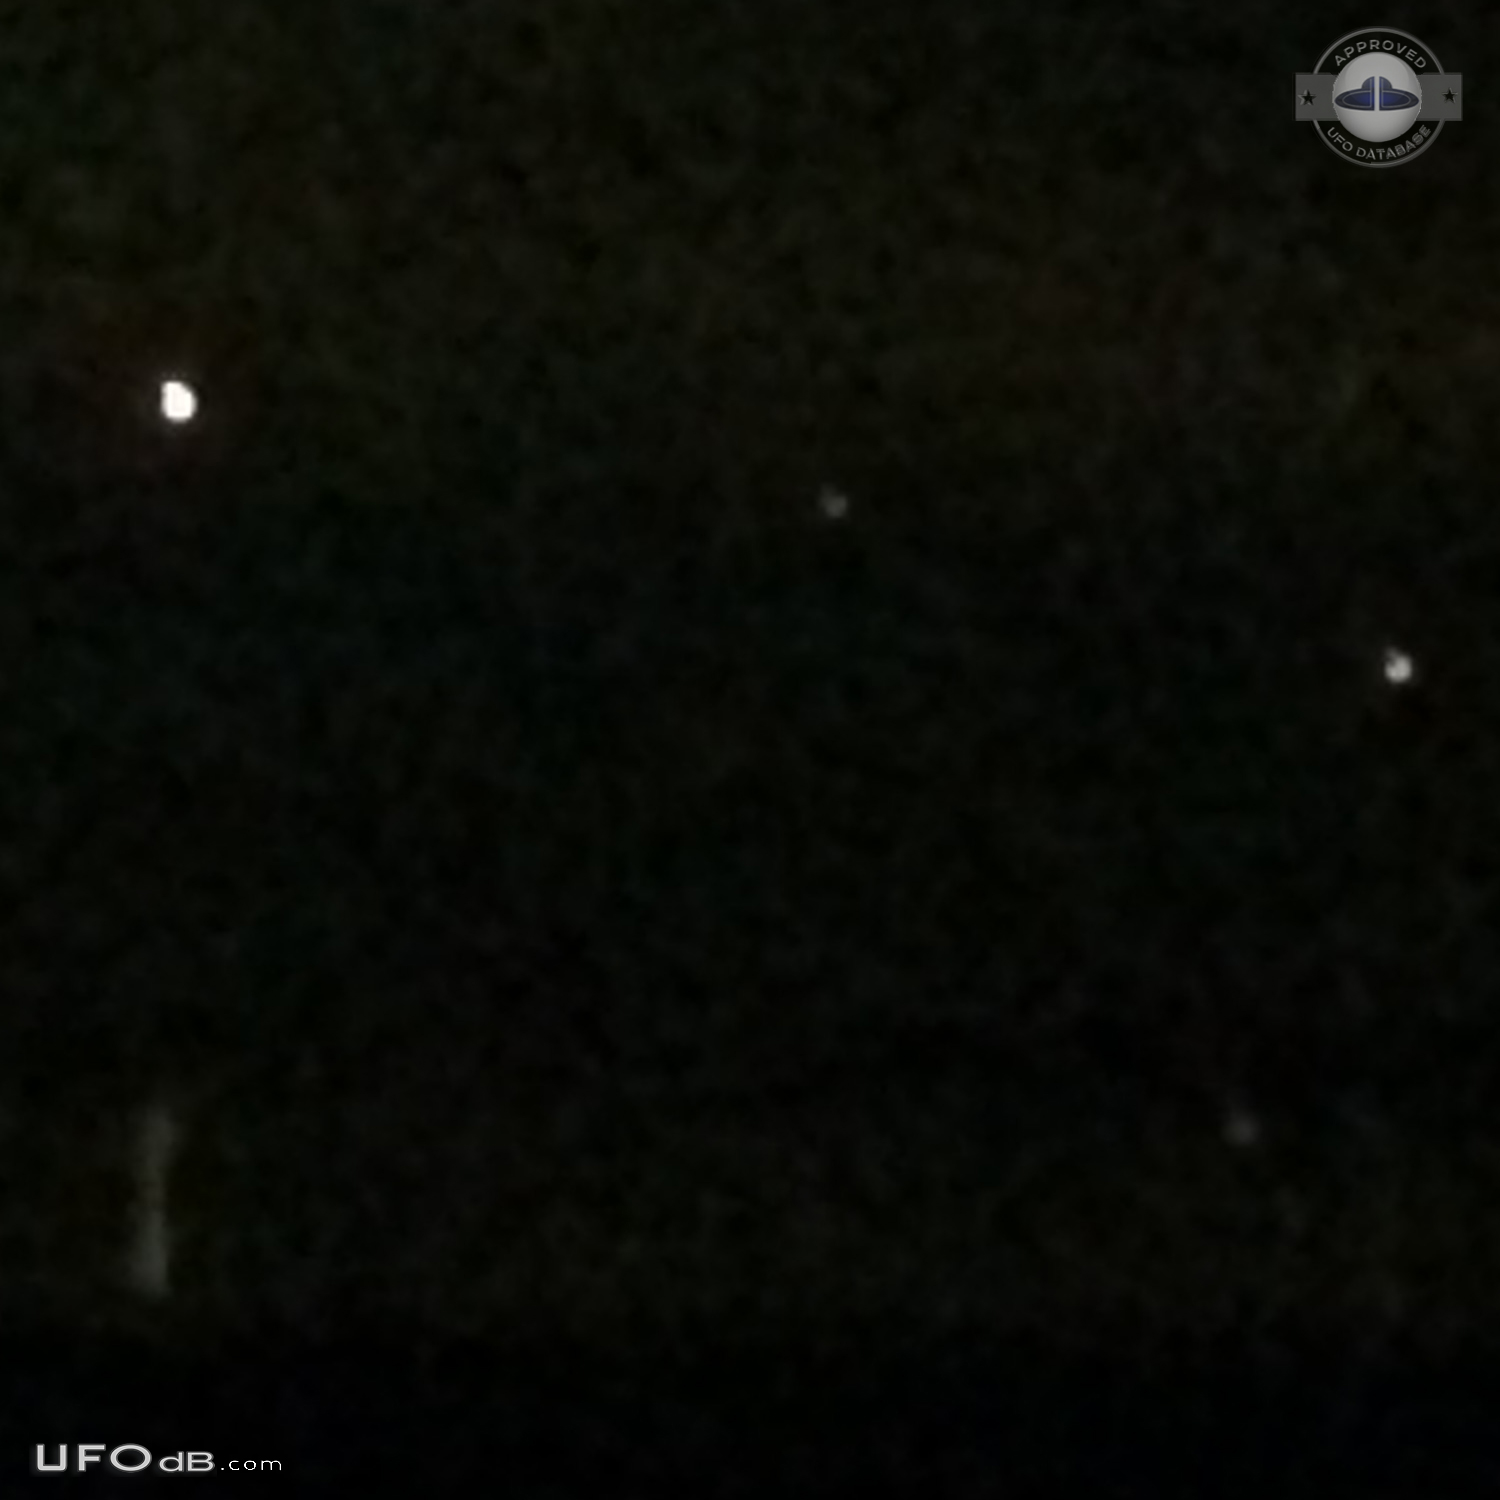 Yellowish-white UFOs with hints of red at center hovered - Clinton Was UFO Picture #755-3